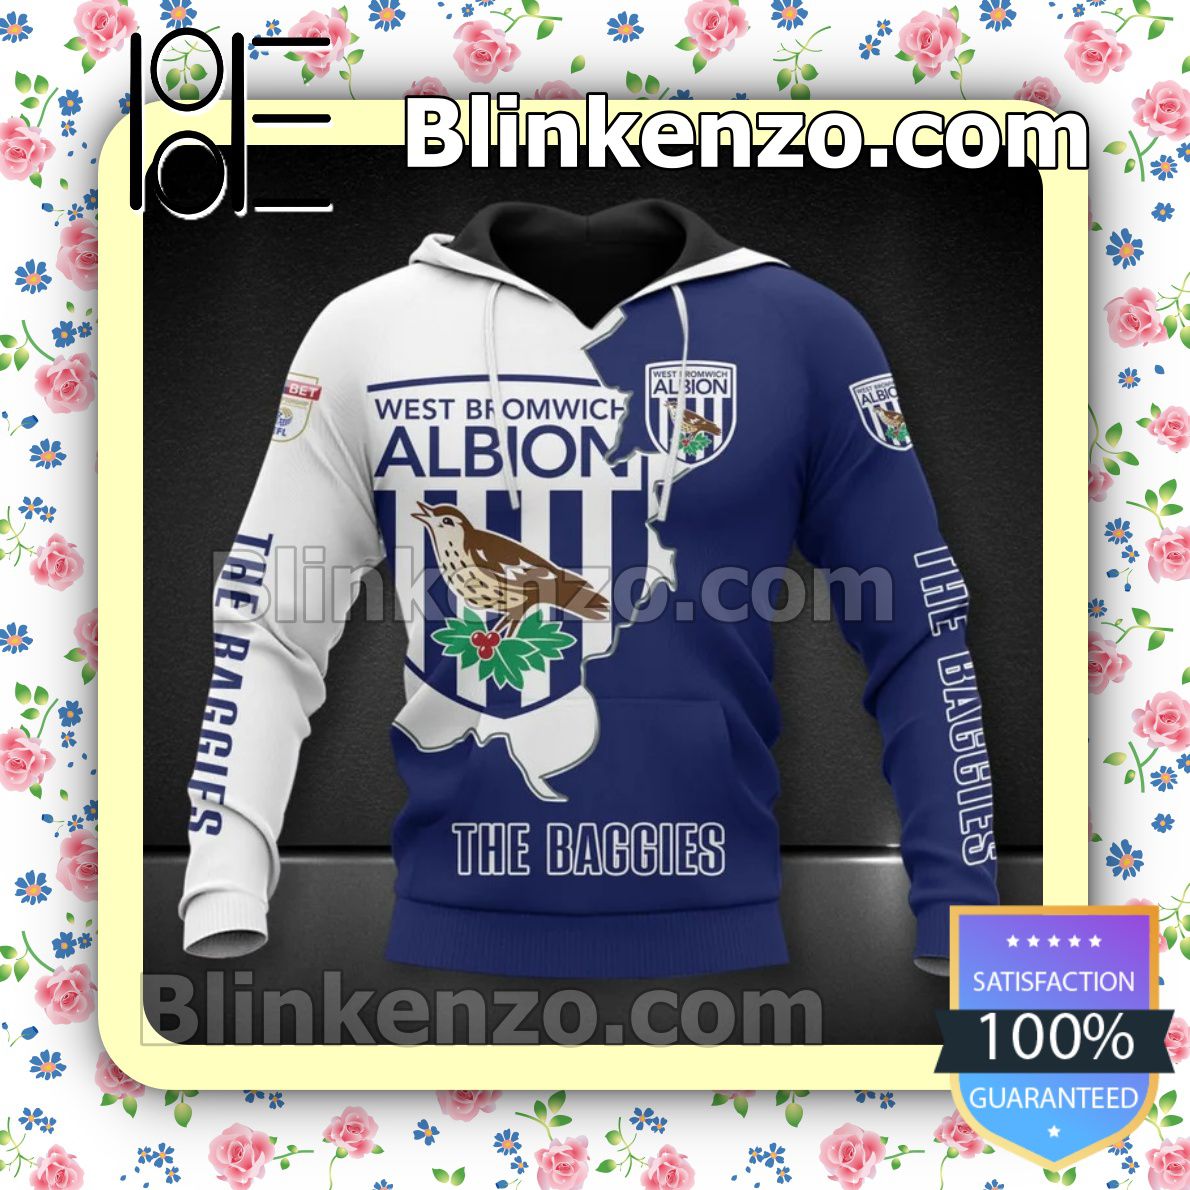 Great Quality West Bromwich Albion FC The Baggies Men T-shirt, Hooded Sweatshirt